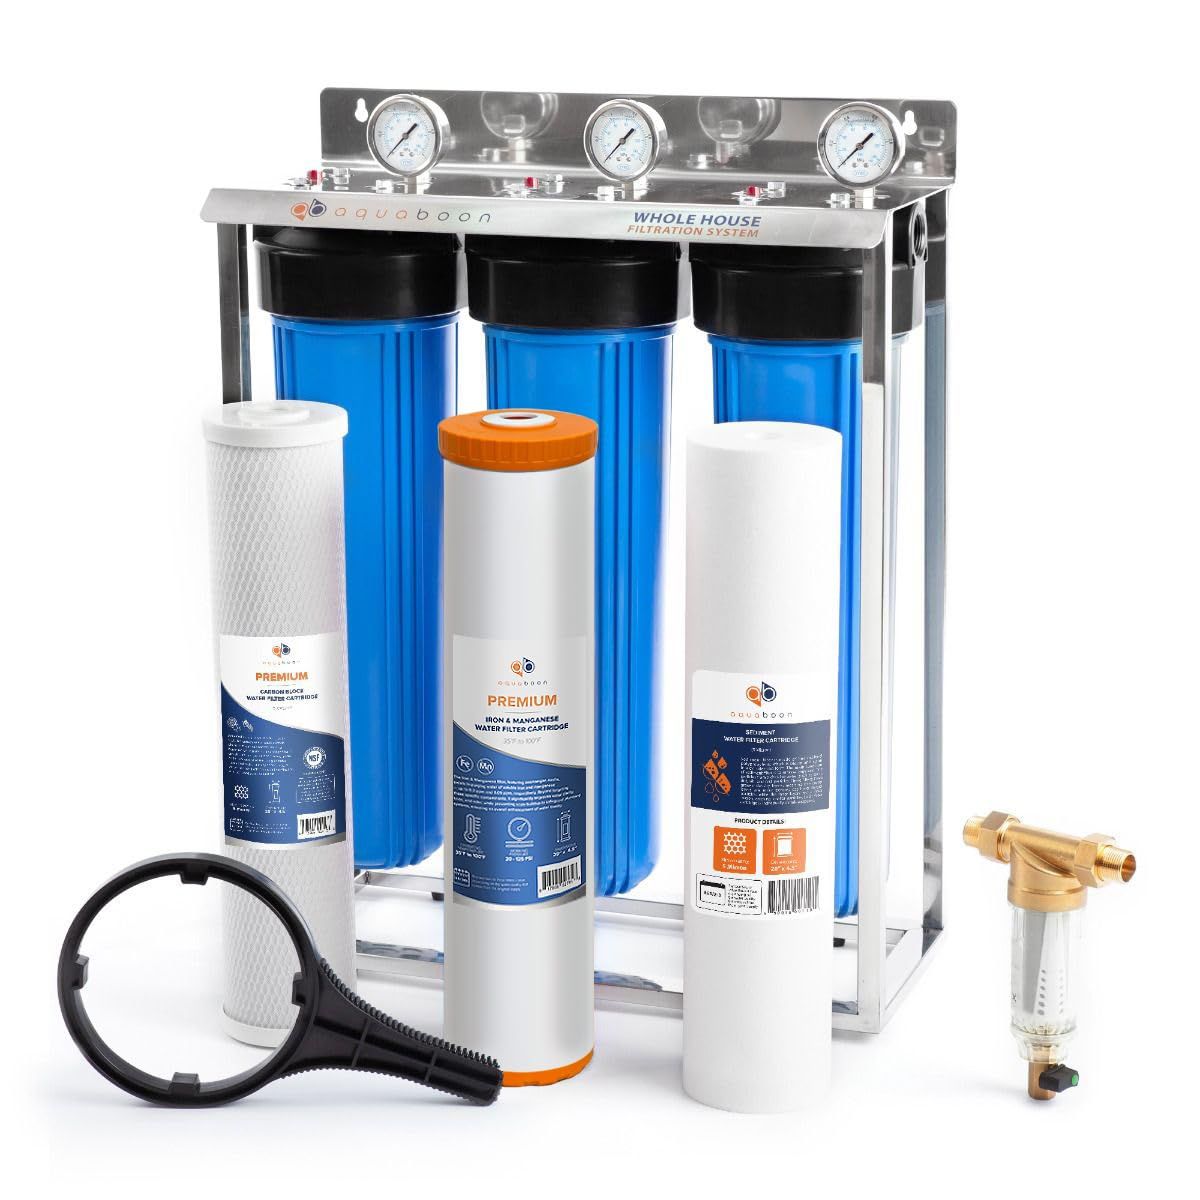 Aquaboon Whole House 3-Stage 20" Water Filtration System For Iron & Manganese Filtration (Carbon, Iron & Manganese, Sediment Filters), Stainless Steel Stand AB-3WHS20BB-1C20BB5MP-1IRM20BB5M-1S20BB5M